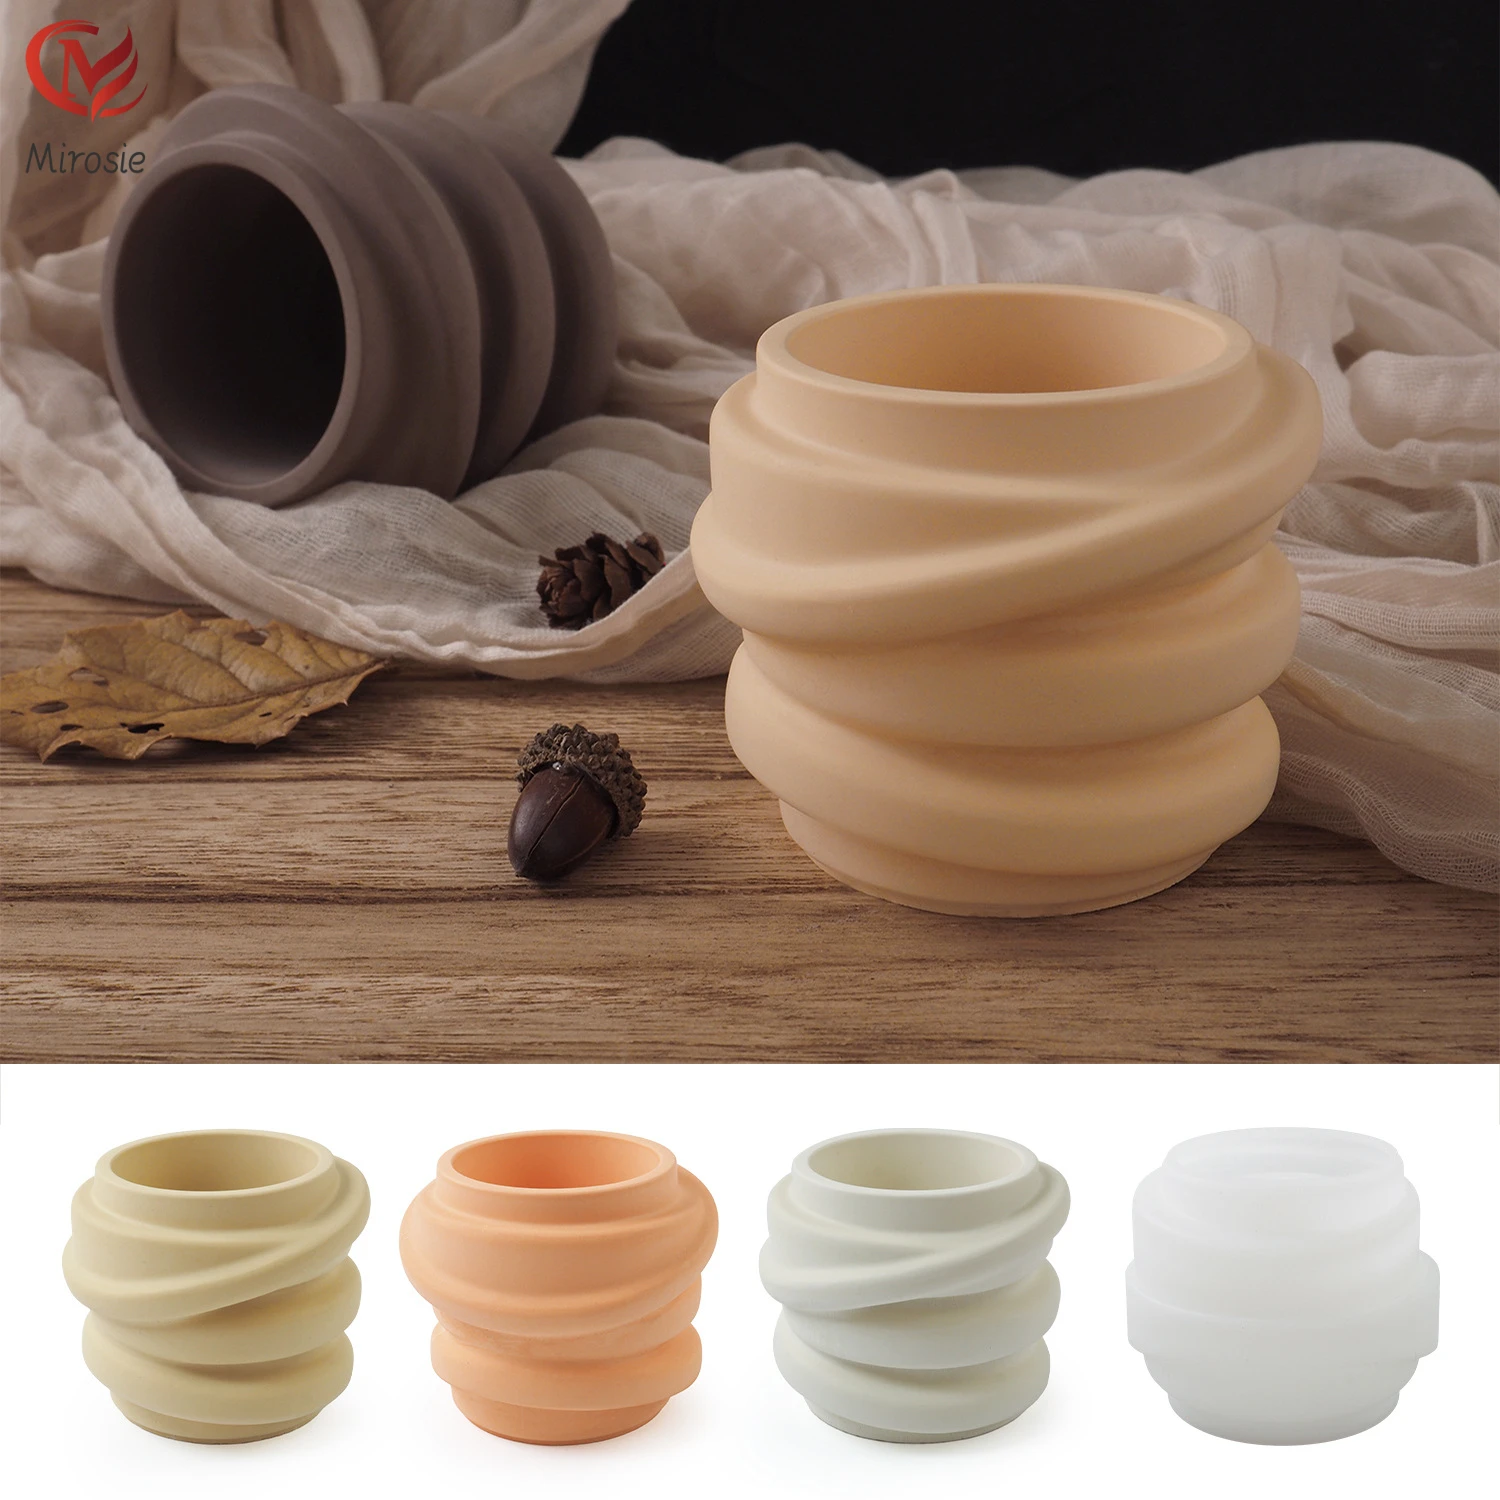 

Mirosie Diy Epoxy Resin Molds Silicone Irregular Shape Gypsum Candle Cup Mirror Silicone Mold Creative Home Decoration